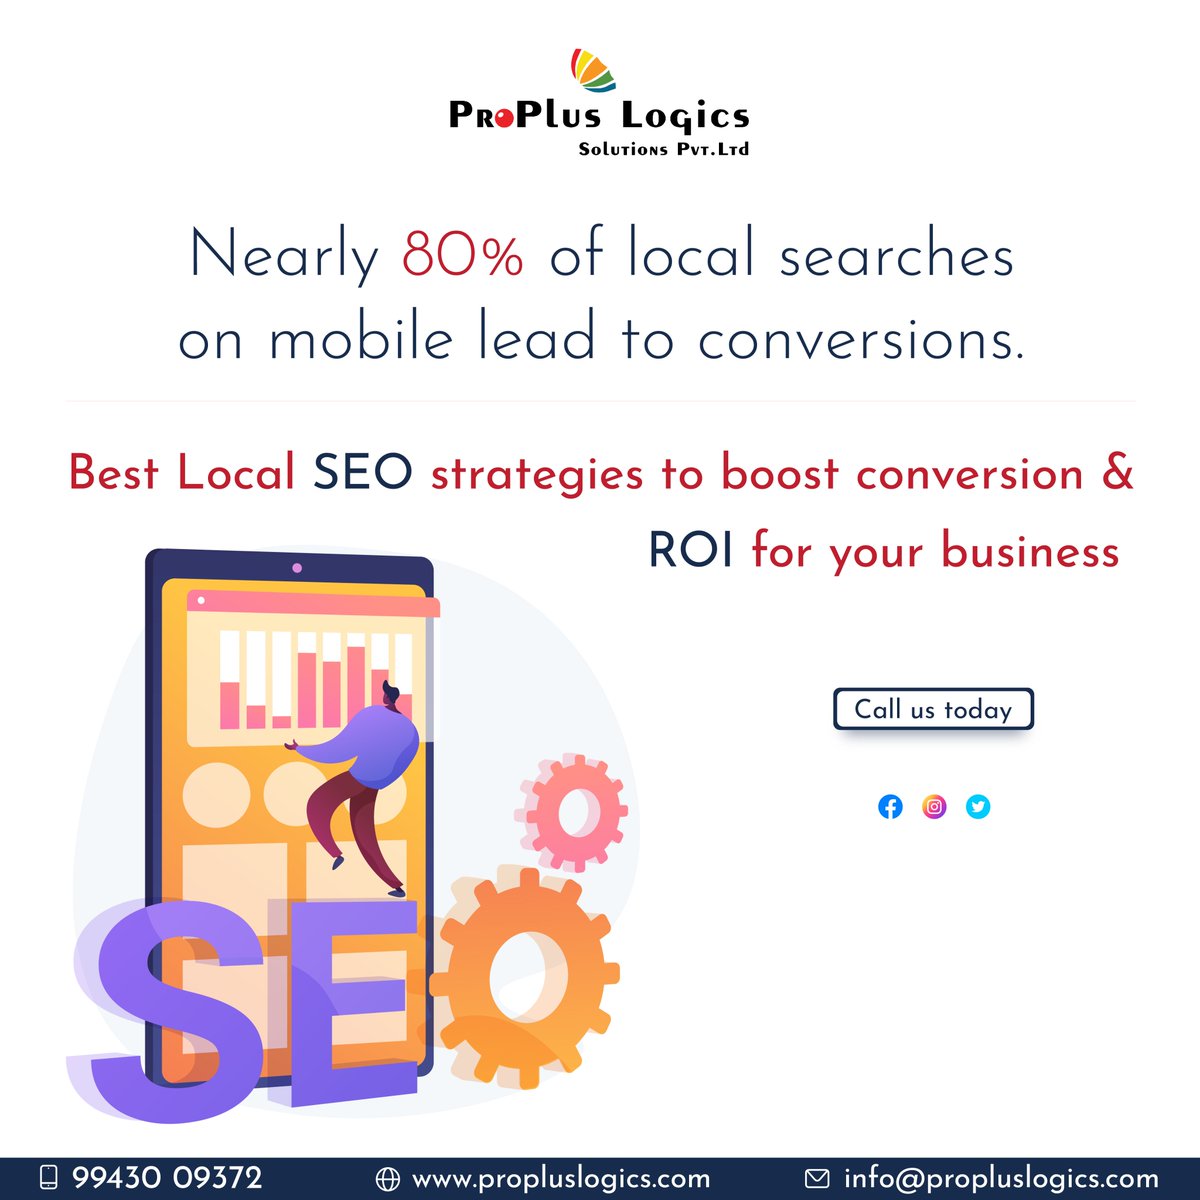 Hire a professional to Rank your Website with Our Best SEO Services. 

Call Us Now!

.
.

 #seo #seoexpert #seoservices #searchengine #searchengineoptimization #searchengineoptimaztion #searchengine #searchengineoptimizationservices #localseo #localseoservices #localseoagency